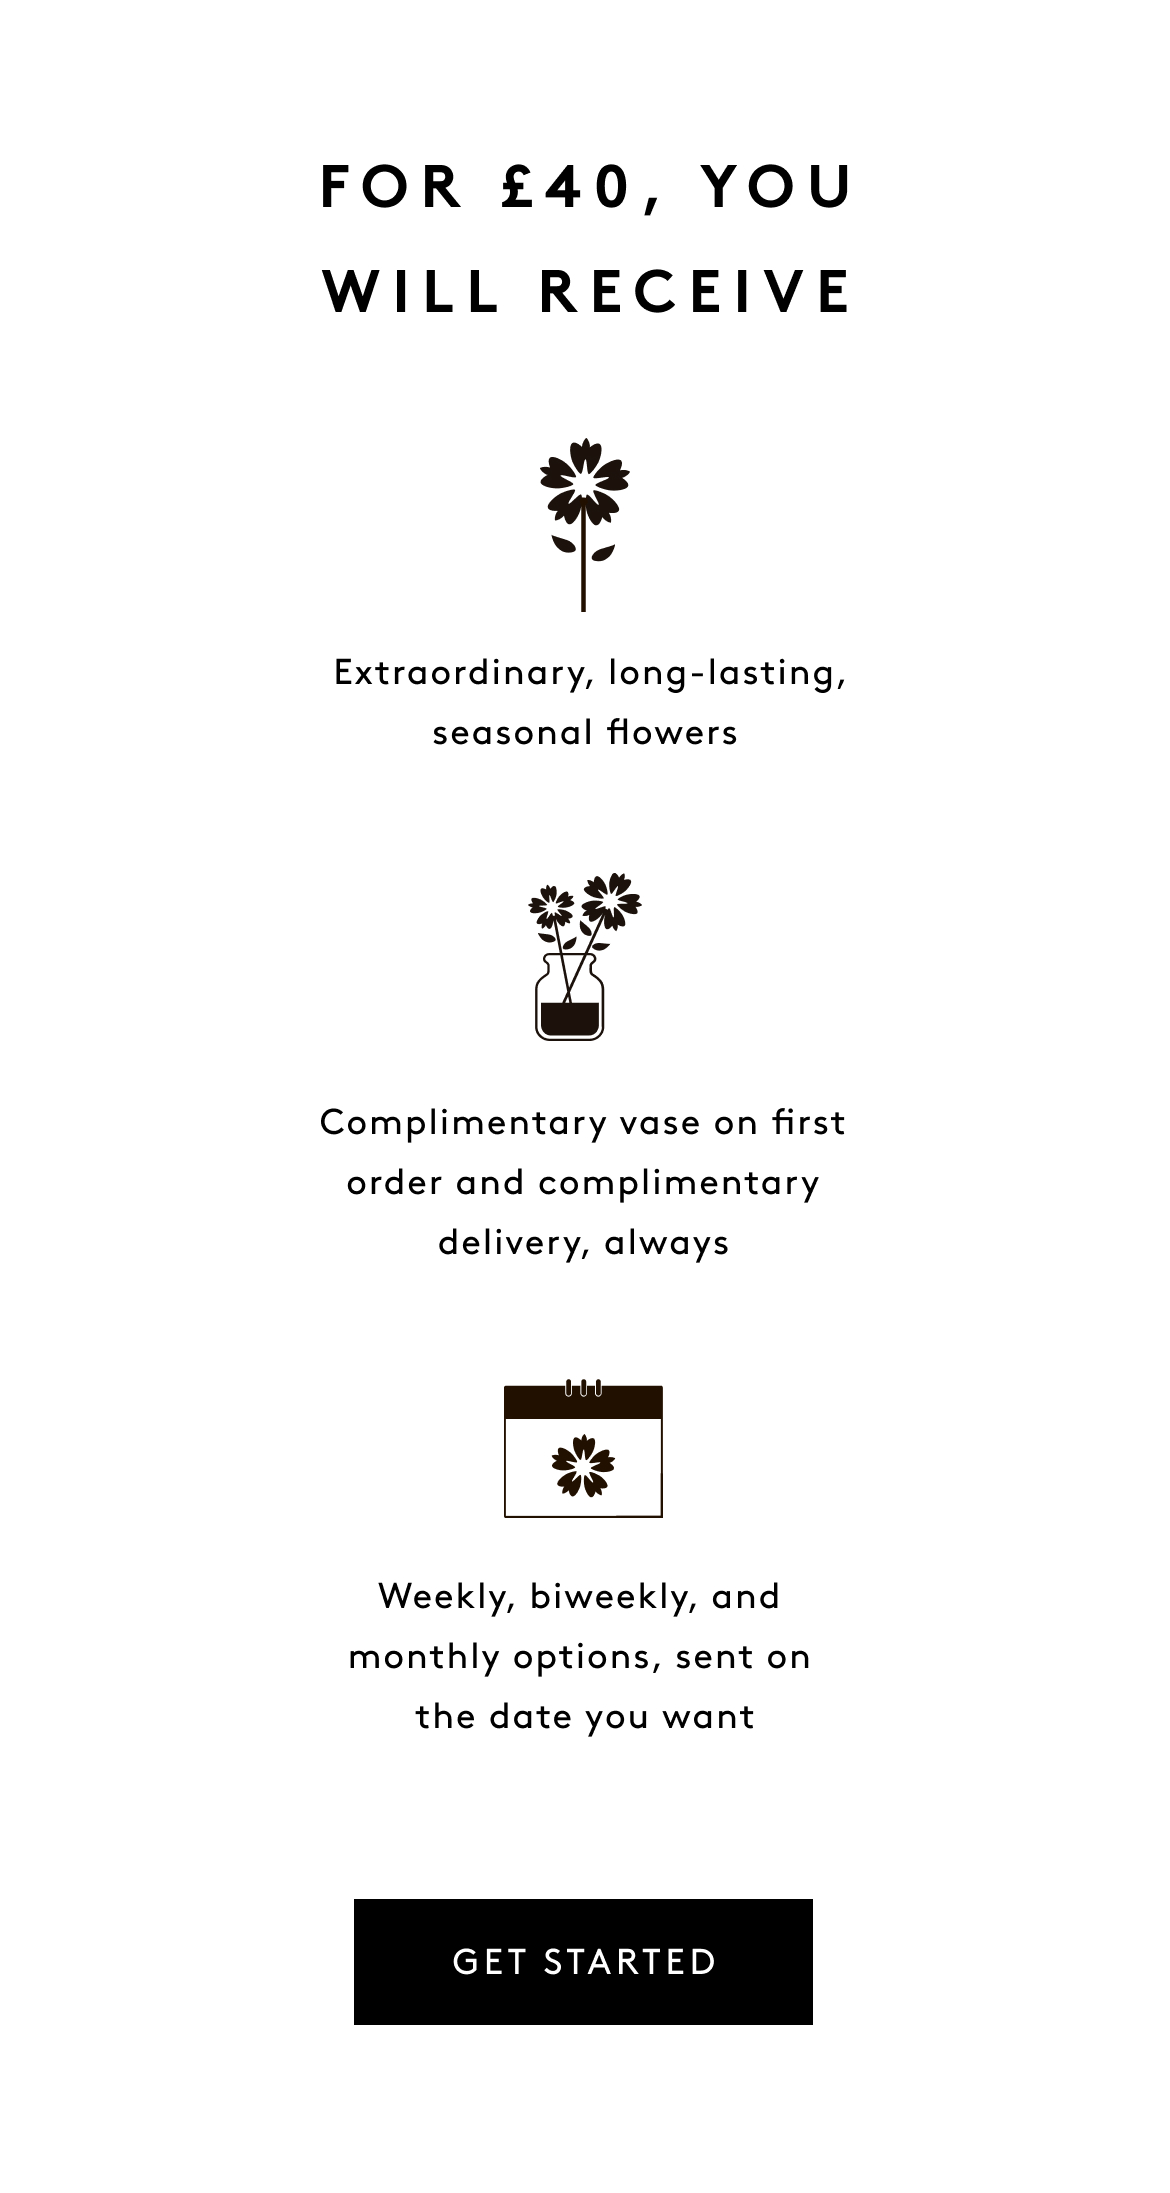 Get flowers weekly, monthly all year round